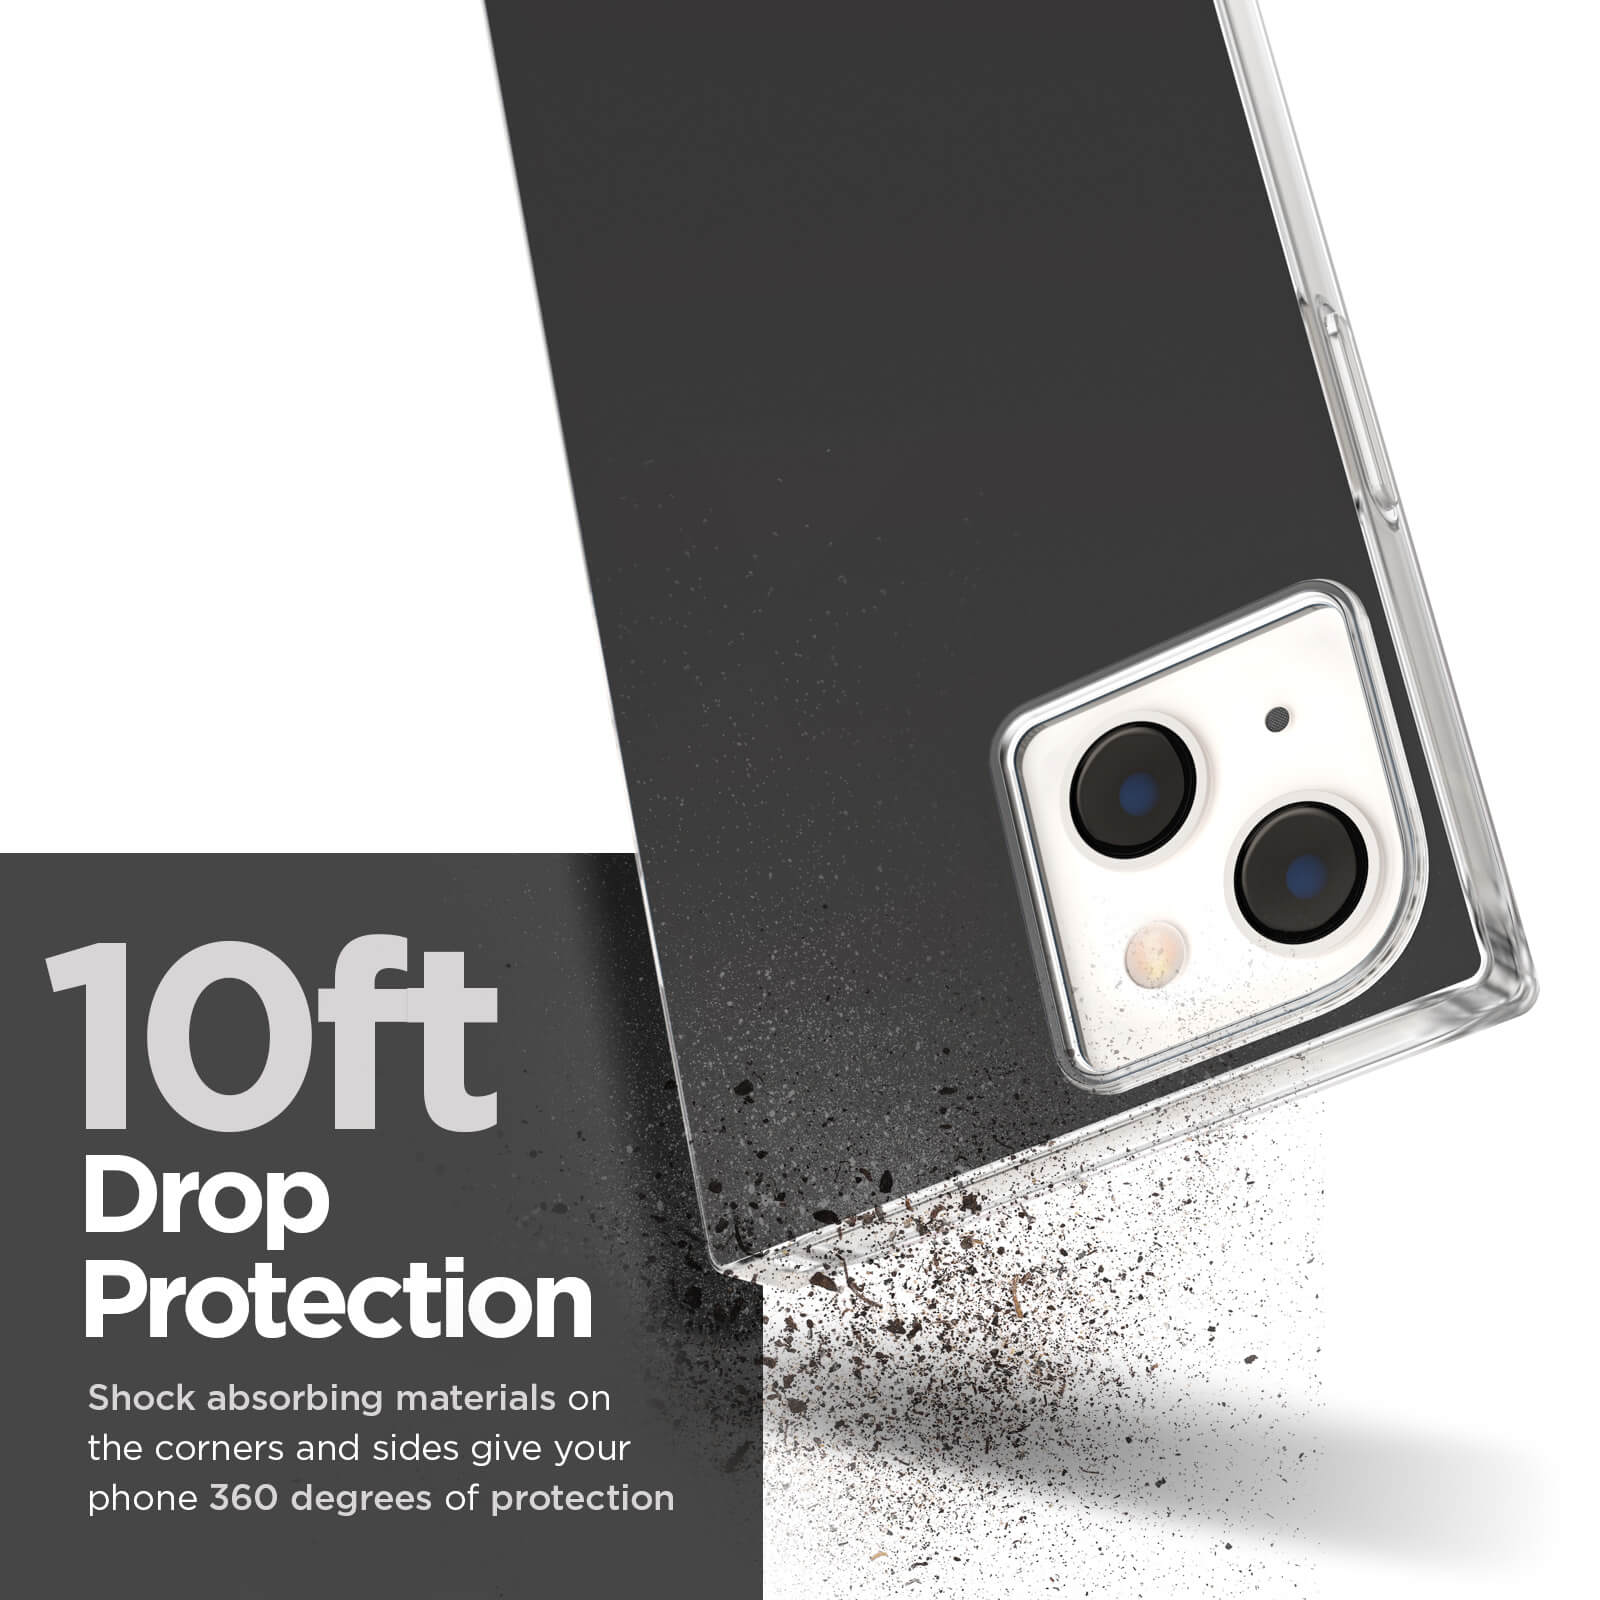 10ft drop protection. Shock absorbing materials on the corners and sides give your phone 360 degrees of protection. color::Black